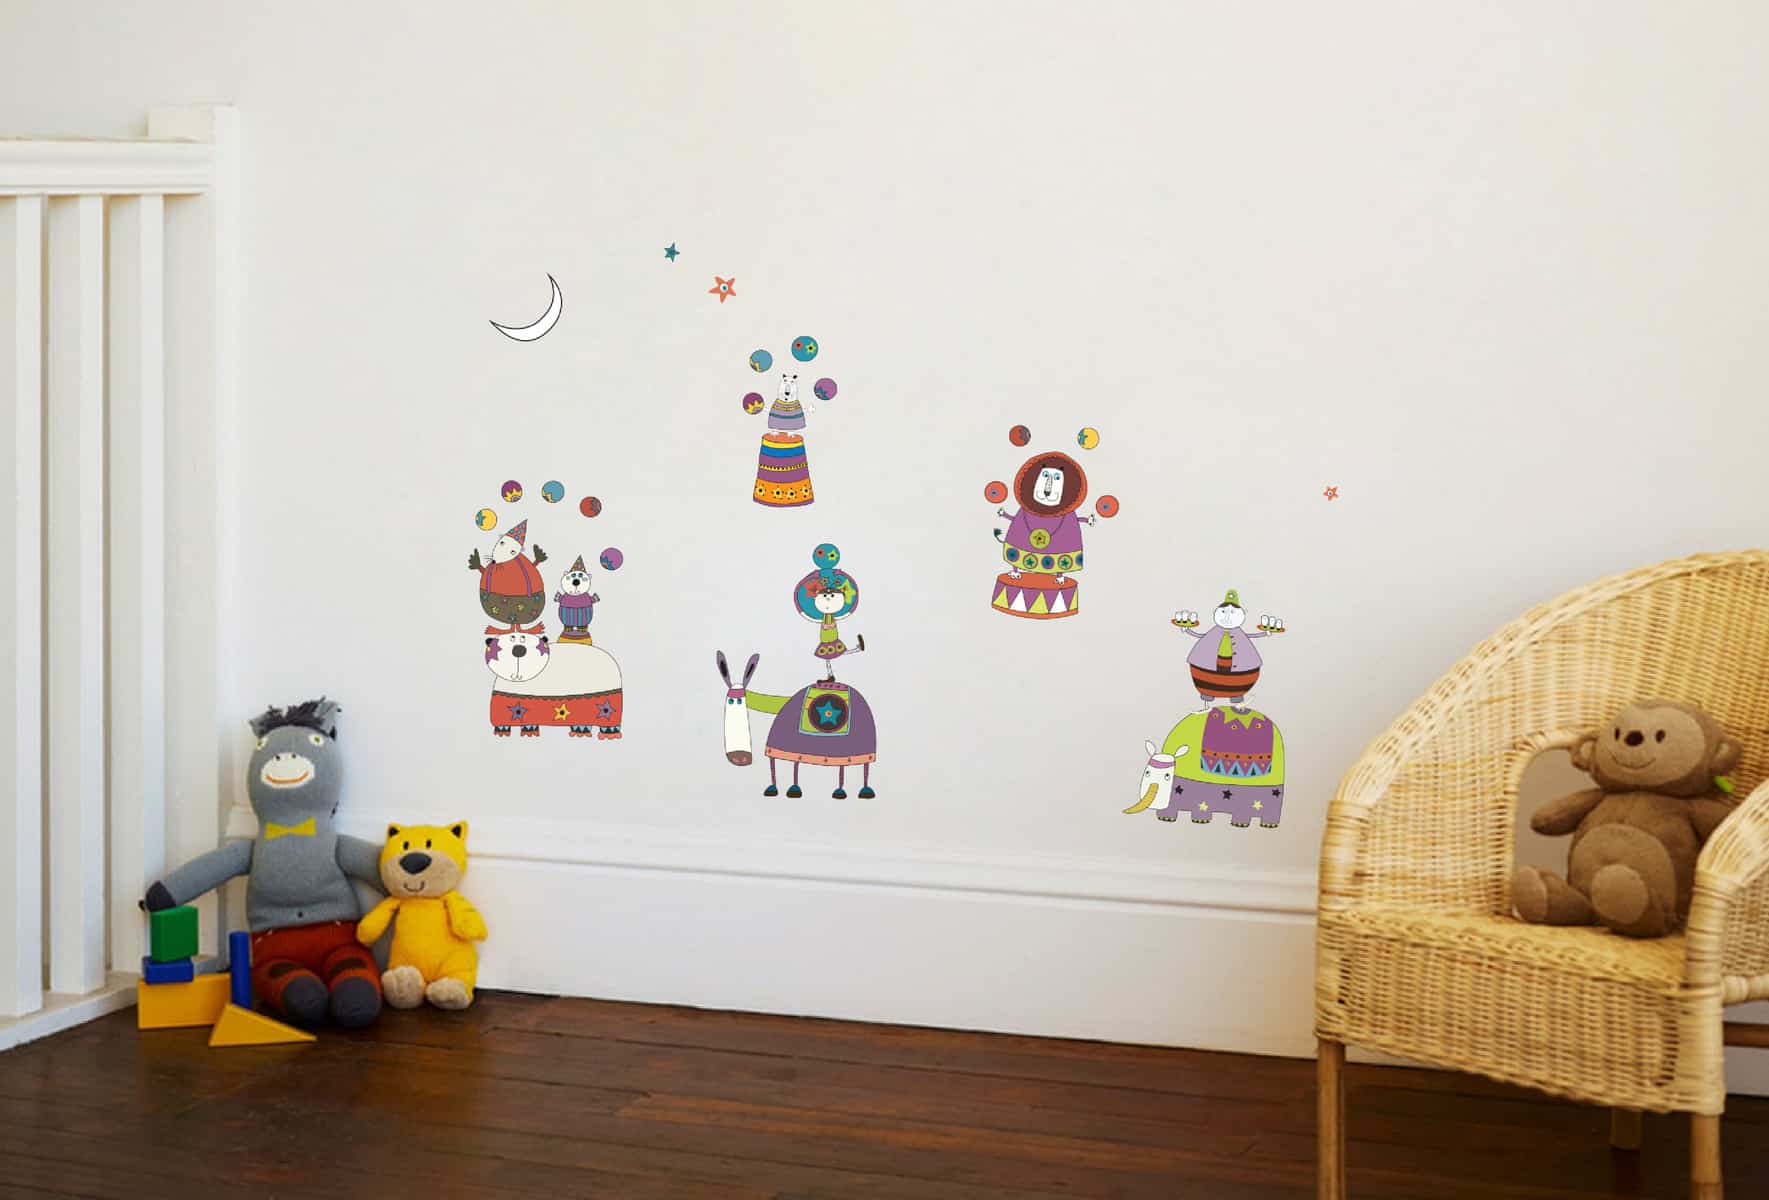 Welcome to the Circus Wall Sticker